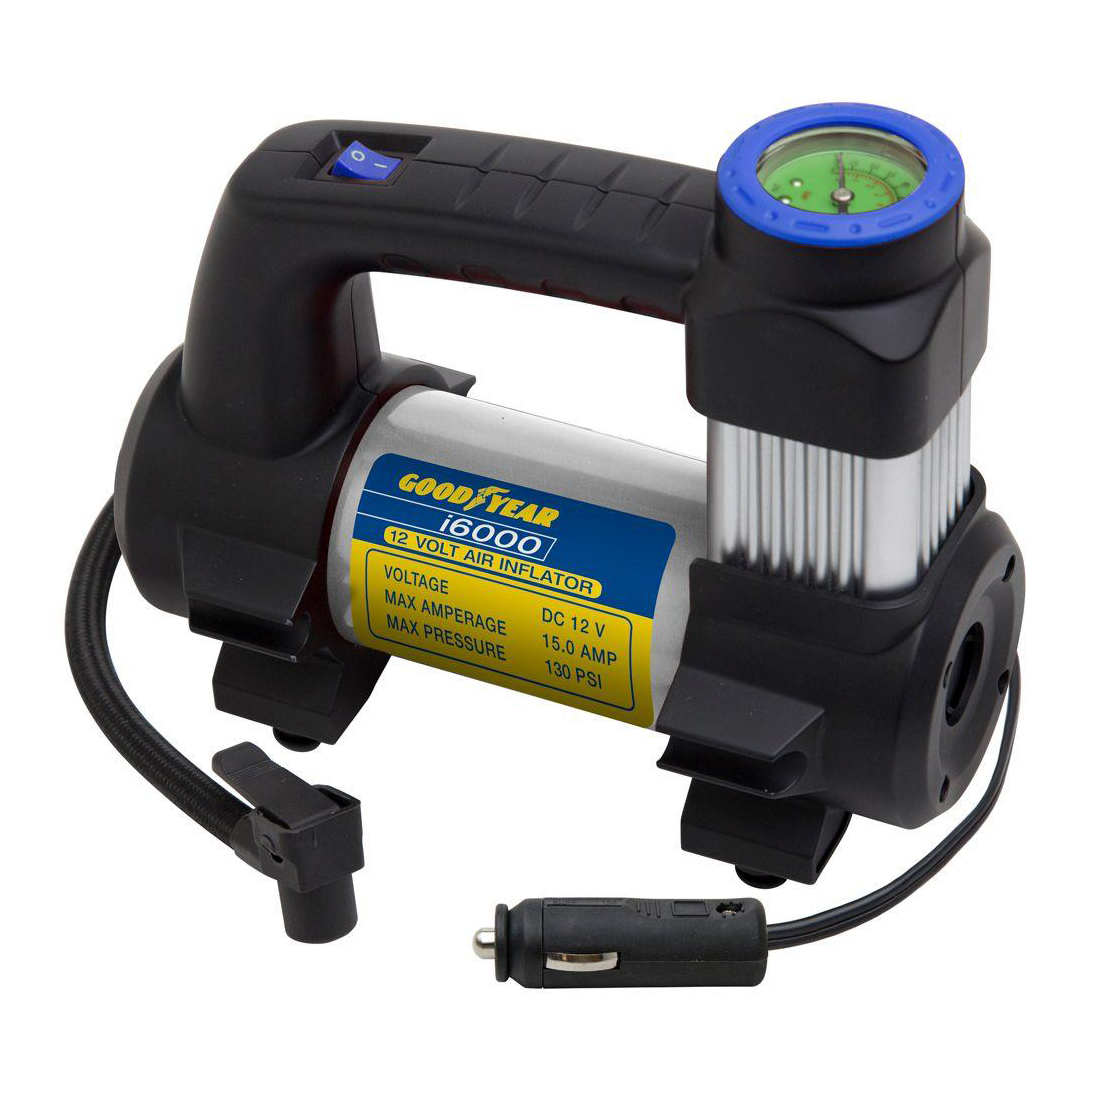 Goodyear Mini Tyre Inflator-RCP-D17D at Rs 1250